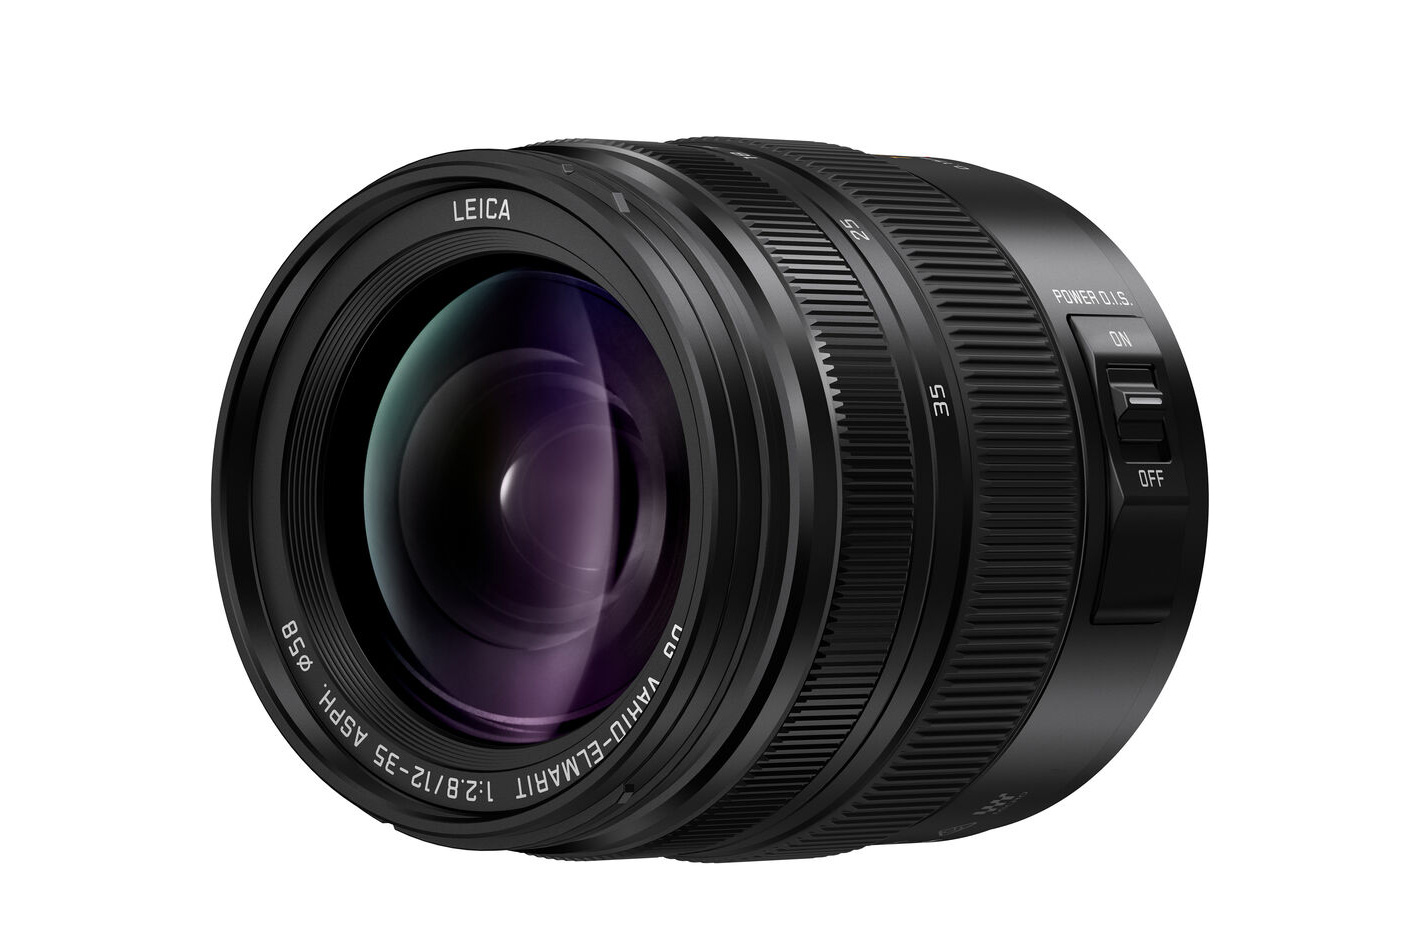 Panasonic redesigns its classic 12-35mm f/2.8 for the Lumix G series